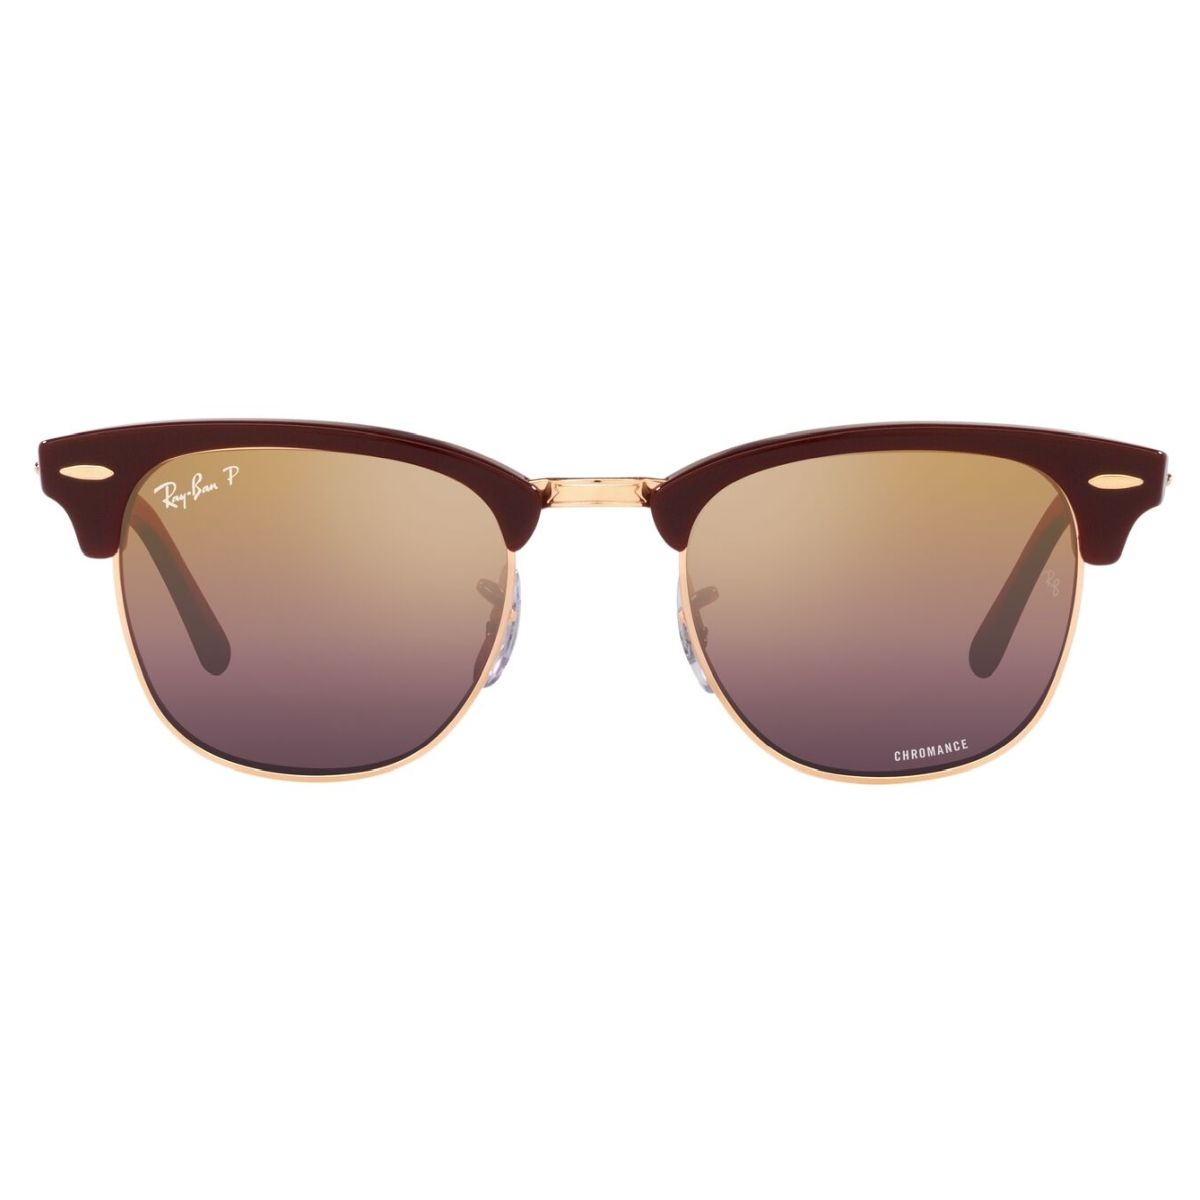 RAY-BAN CLUBMASTER 3016/1365G9/51